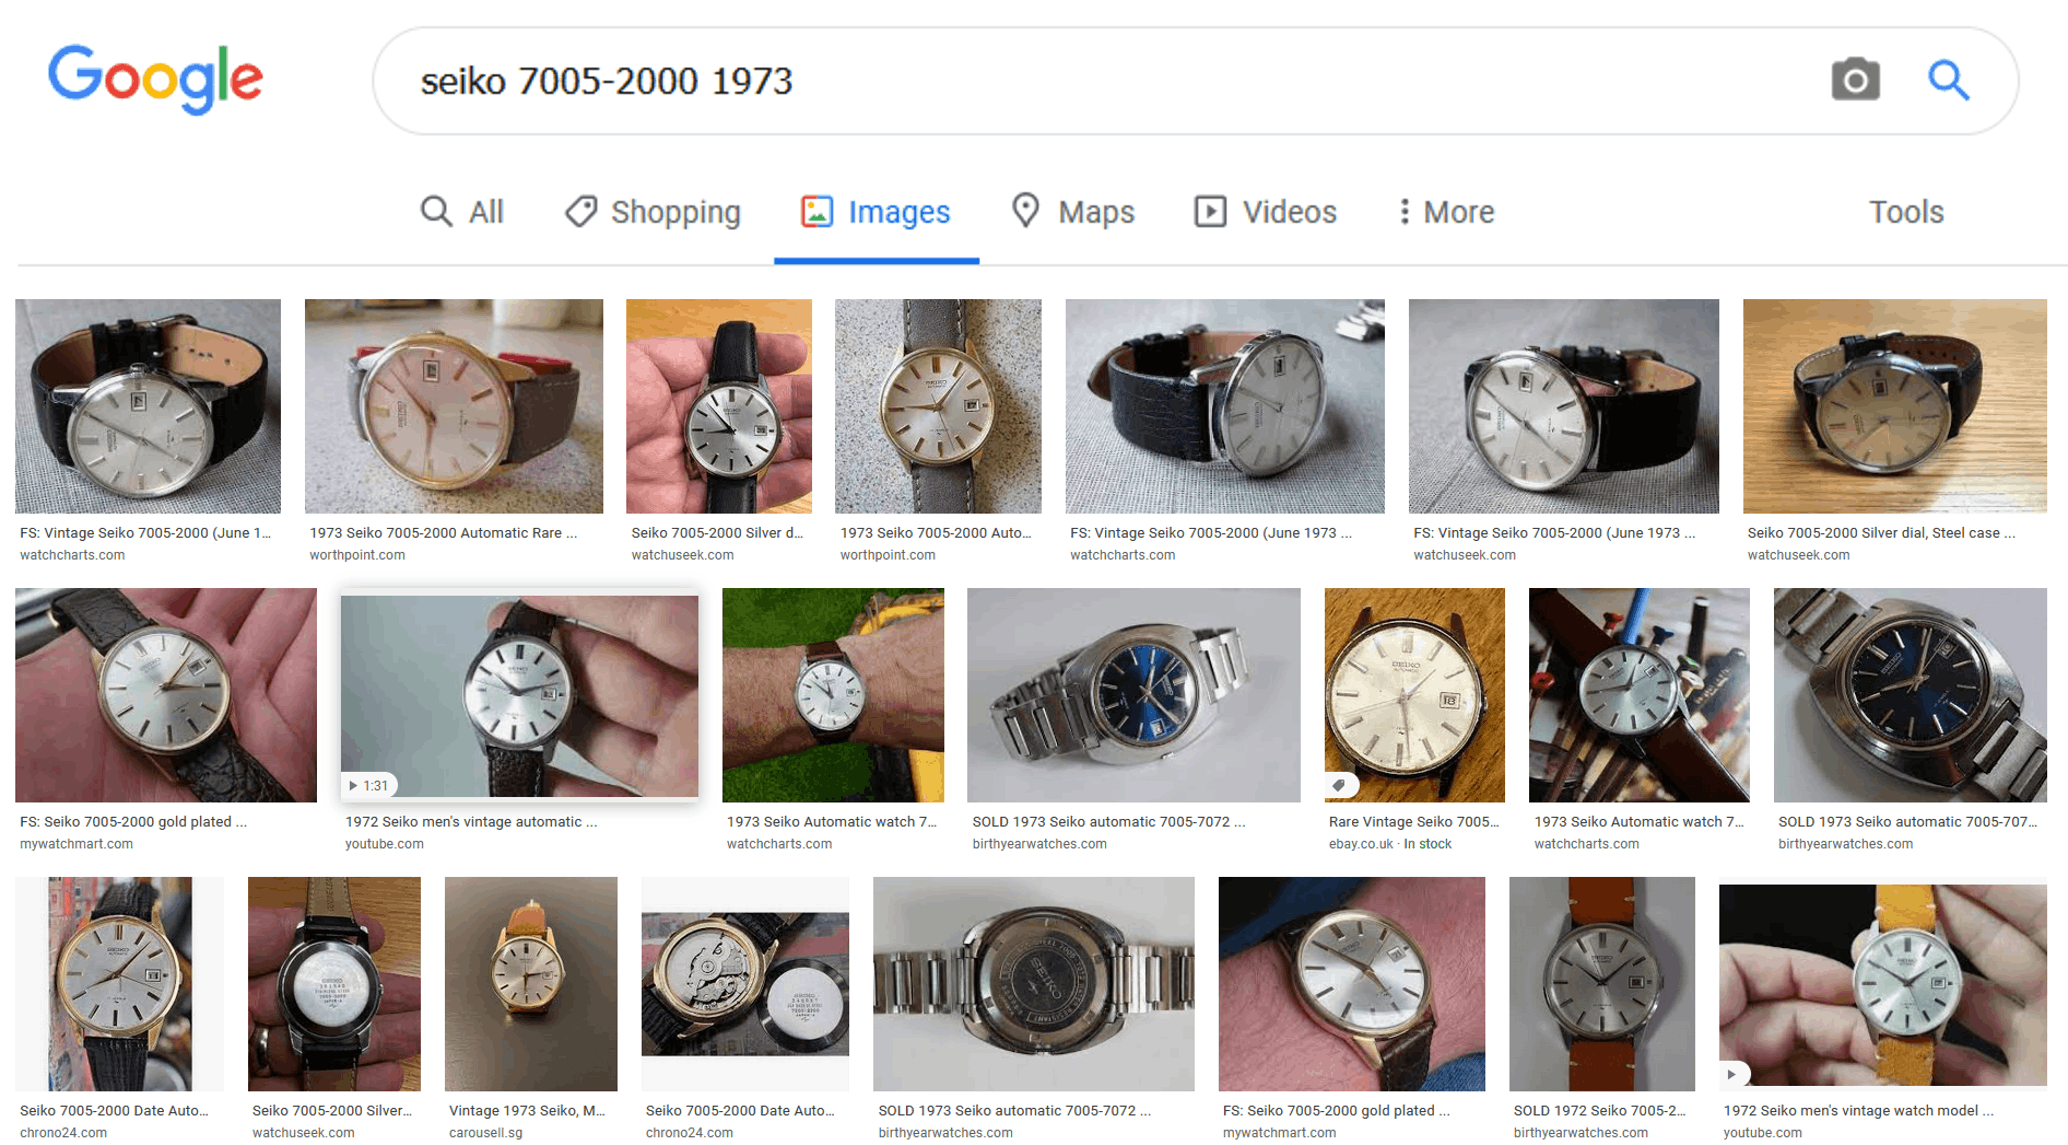 More detailed Google Image Search reveals many examples of this watch.